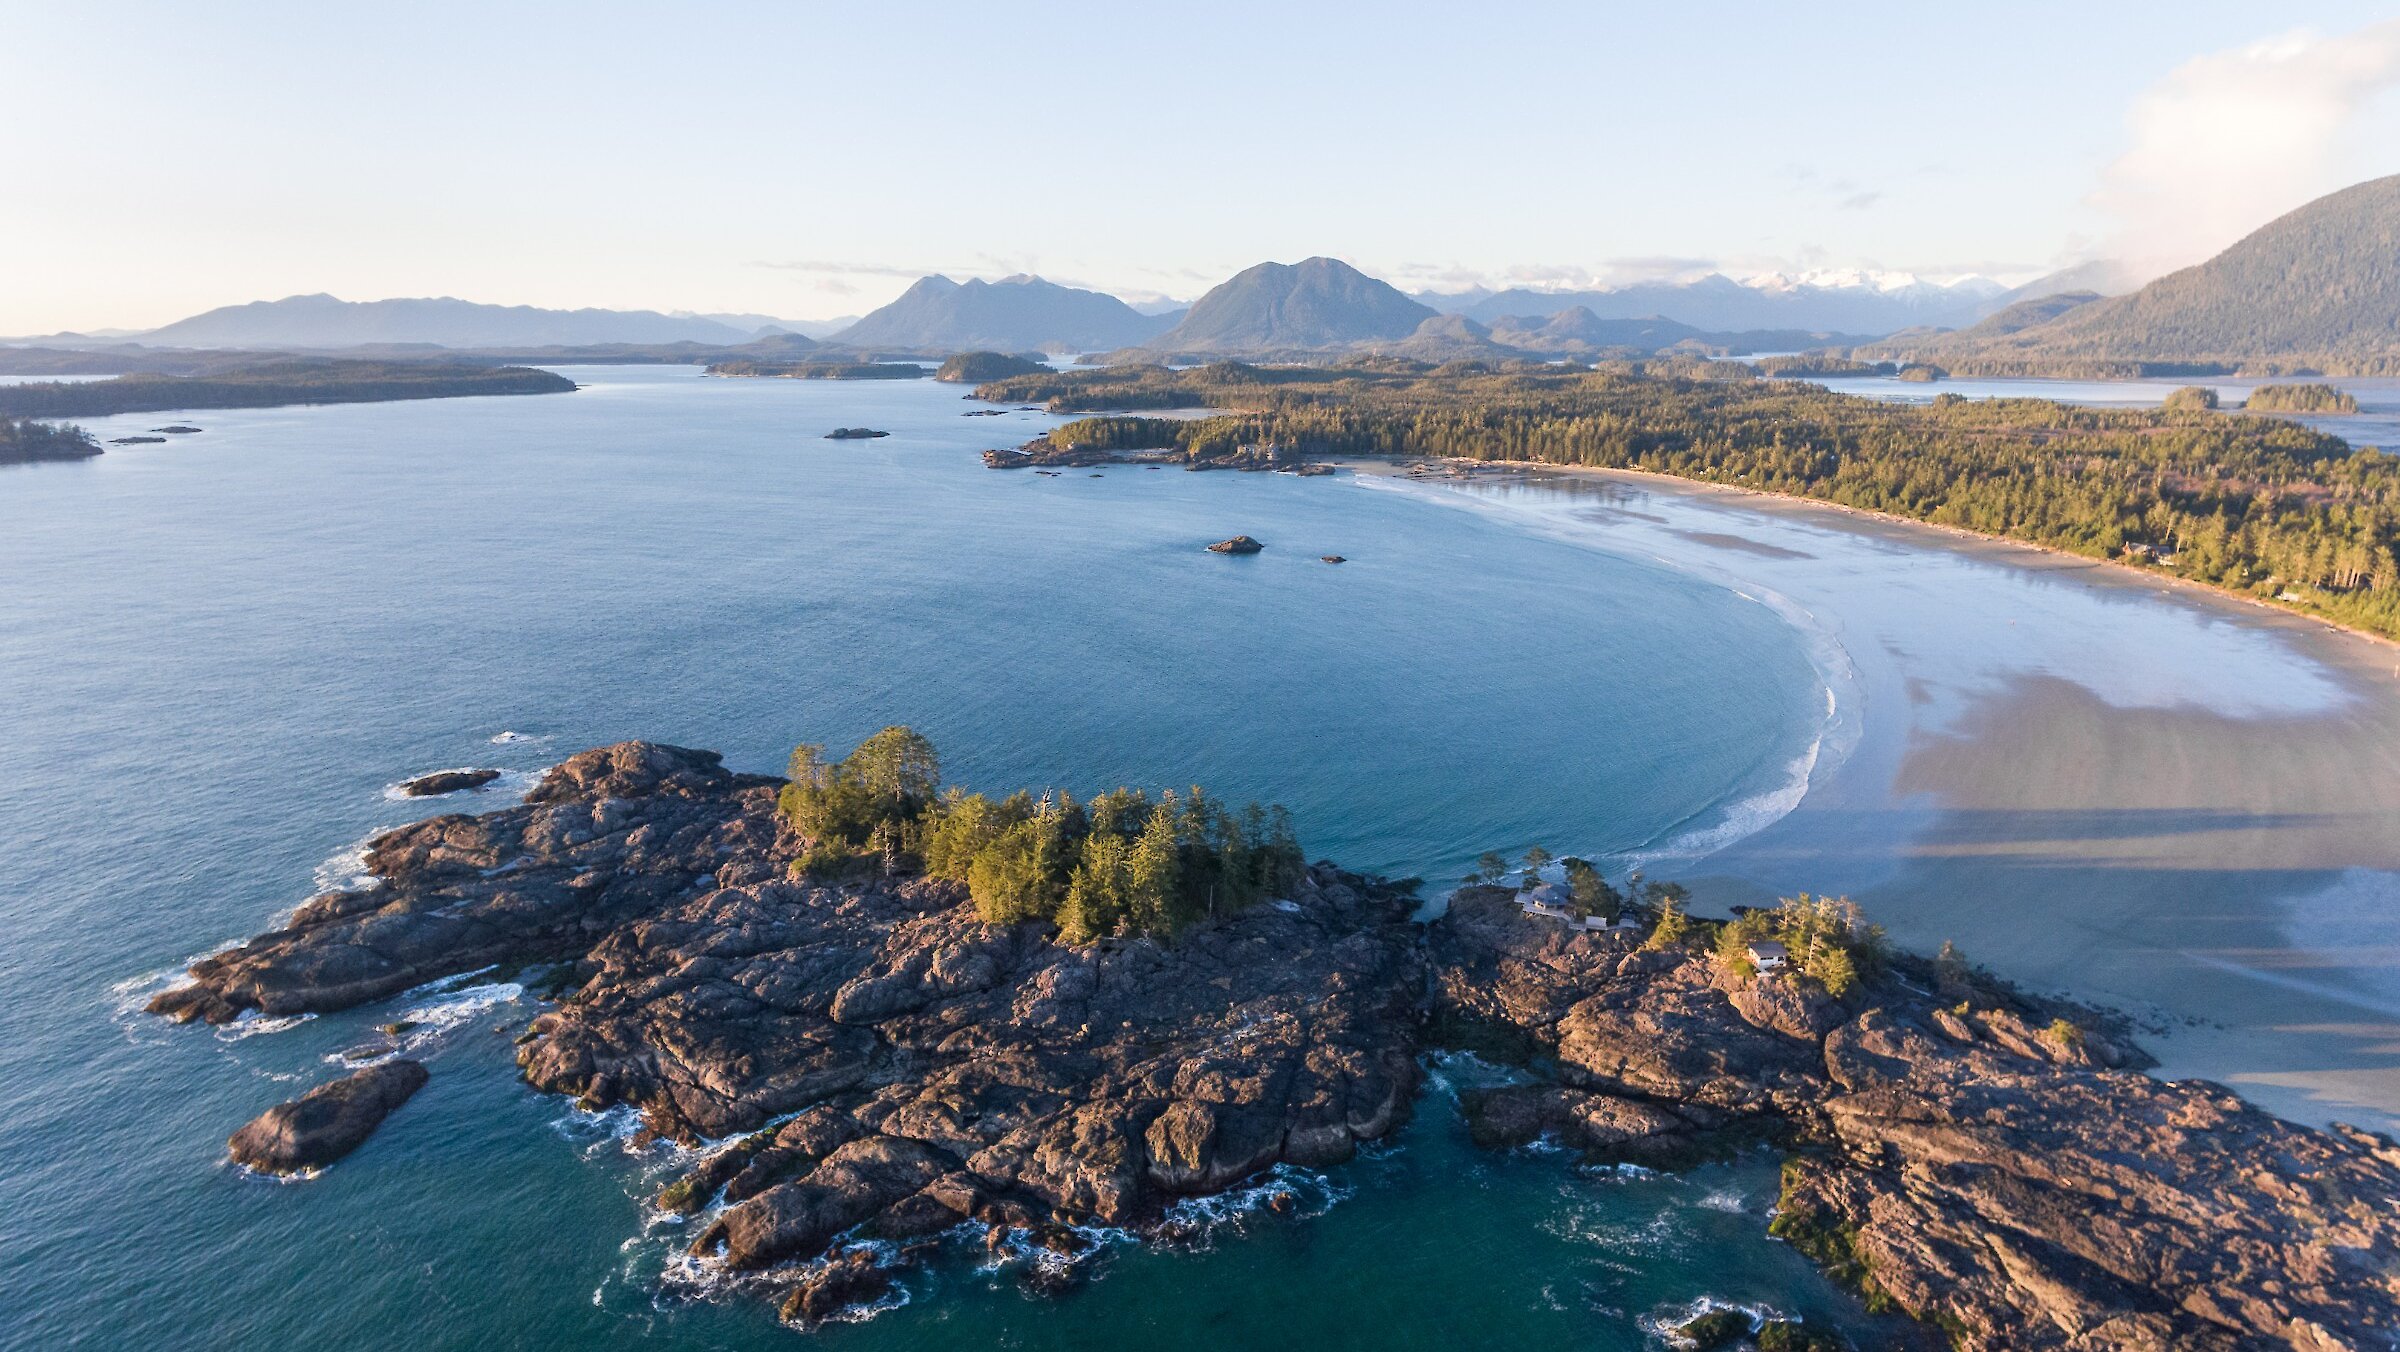 View of Frank Island looking toward North Chesterman Beach and Clayoquot Sound visible in the background.